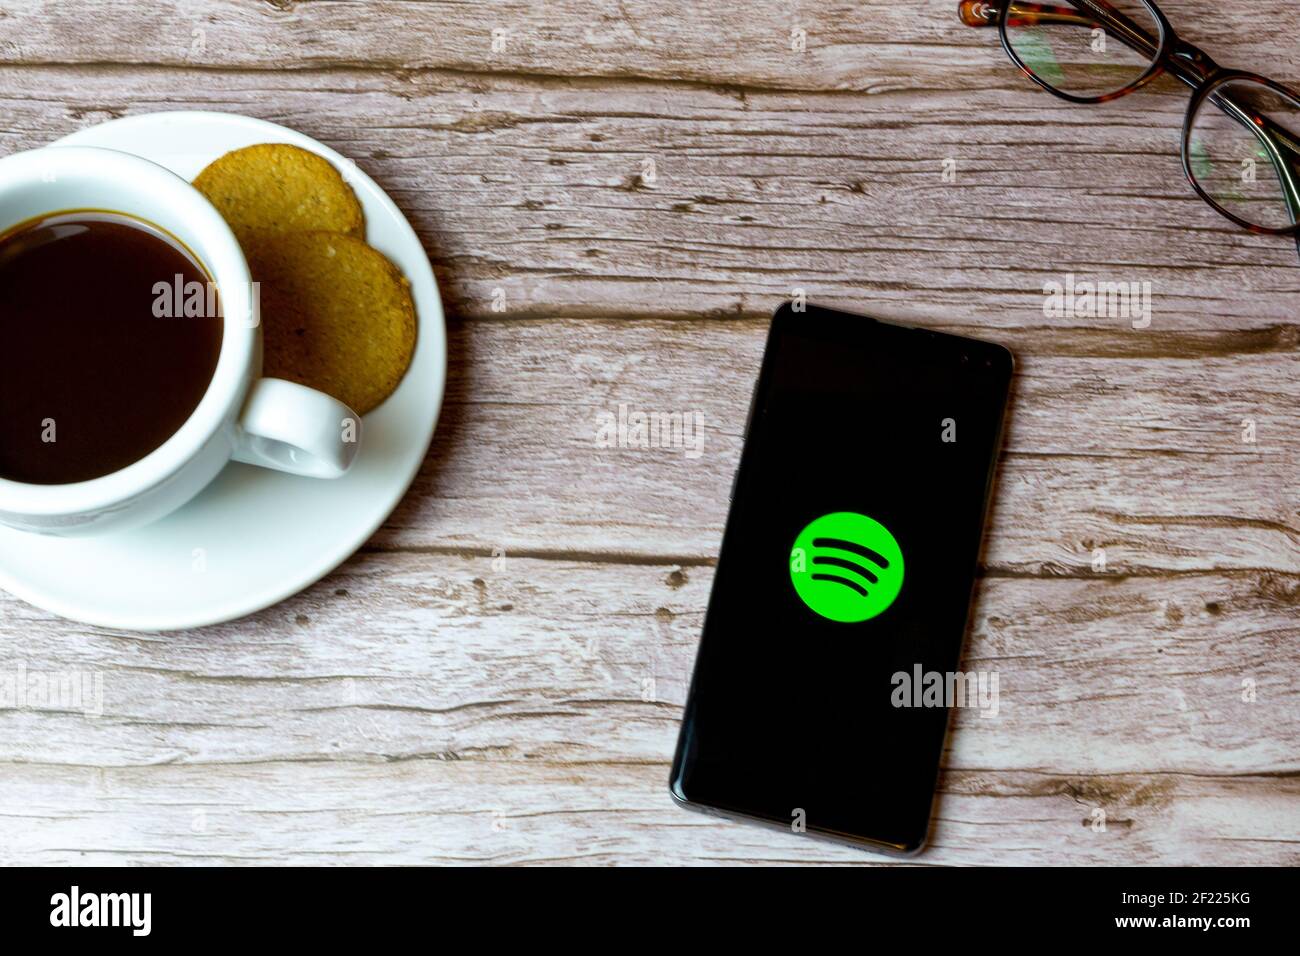 A Mobile phone or cell phone laid on a wooden table with the spotify app opening also a coffee and glasses Stock Photo